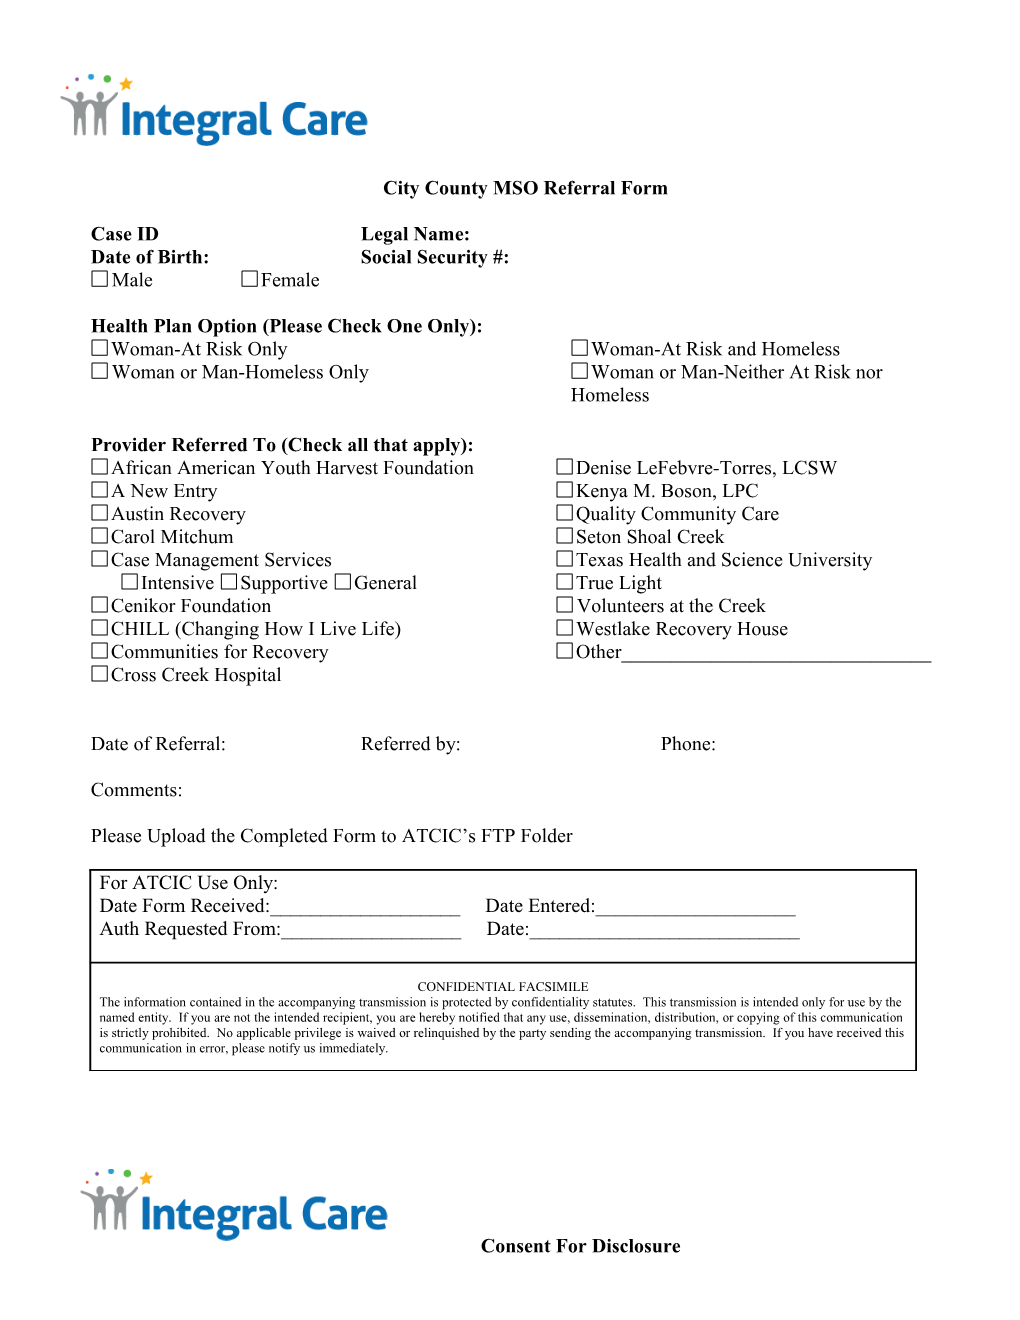 Proposed Conference Applications for CTAAFSC 11/22/2002-11/23/2002